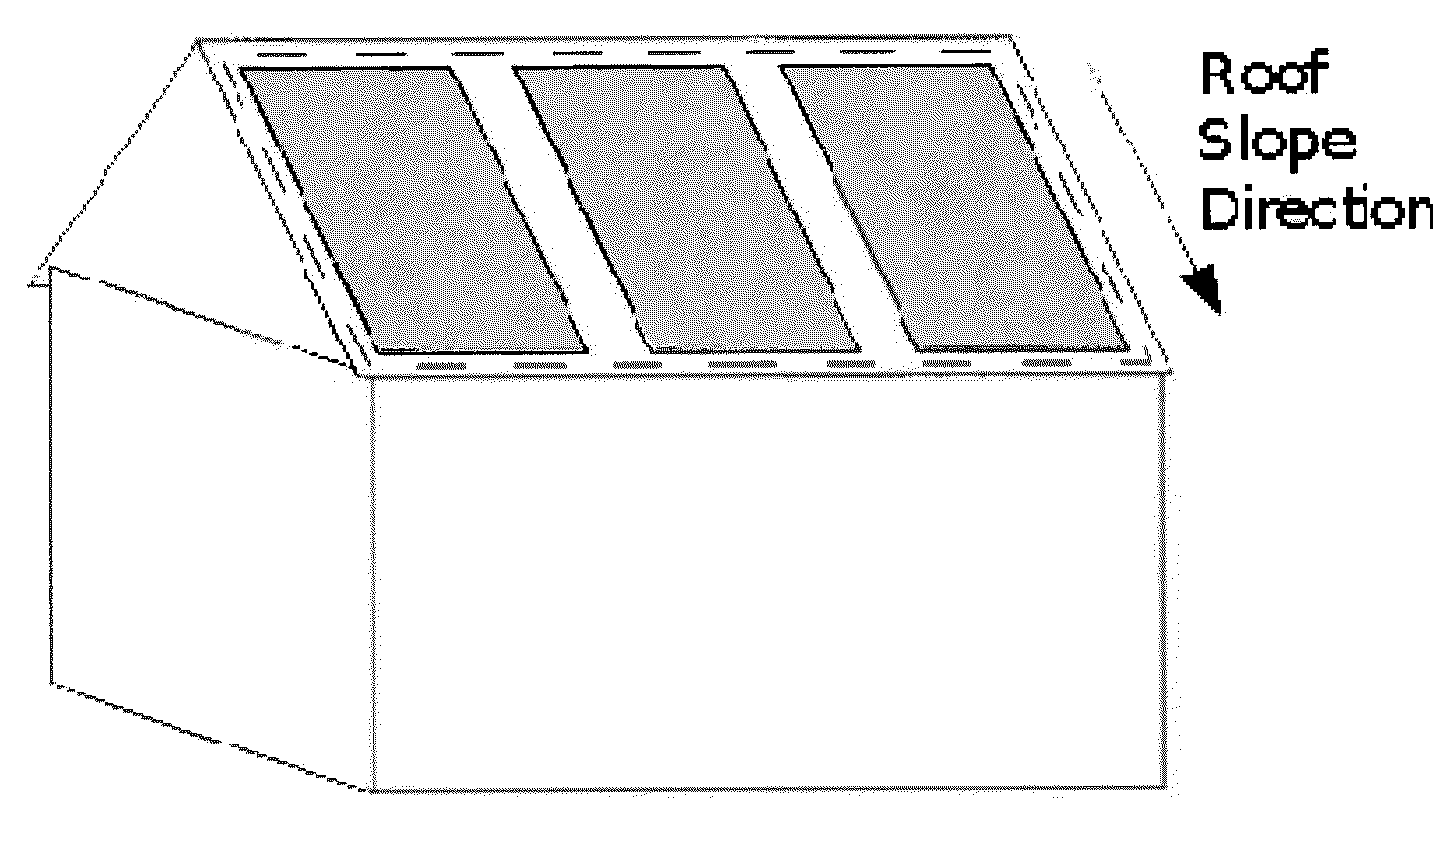 System and Method for Optimized Automated Layout of Solar Panels